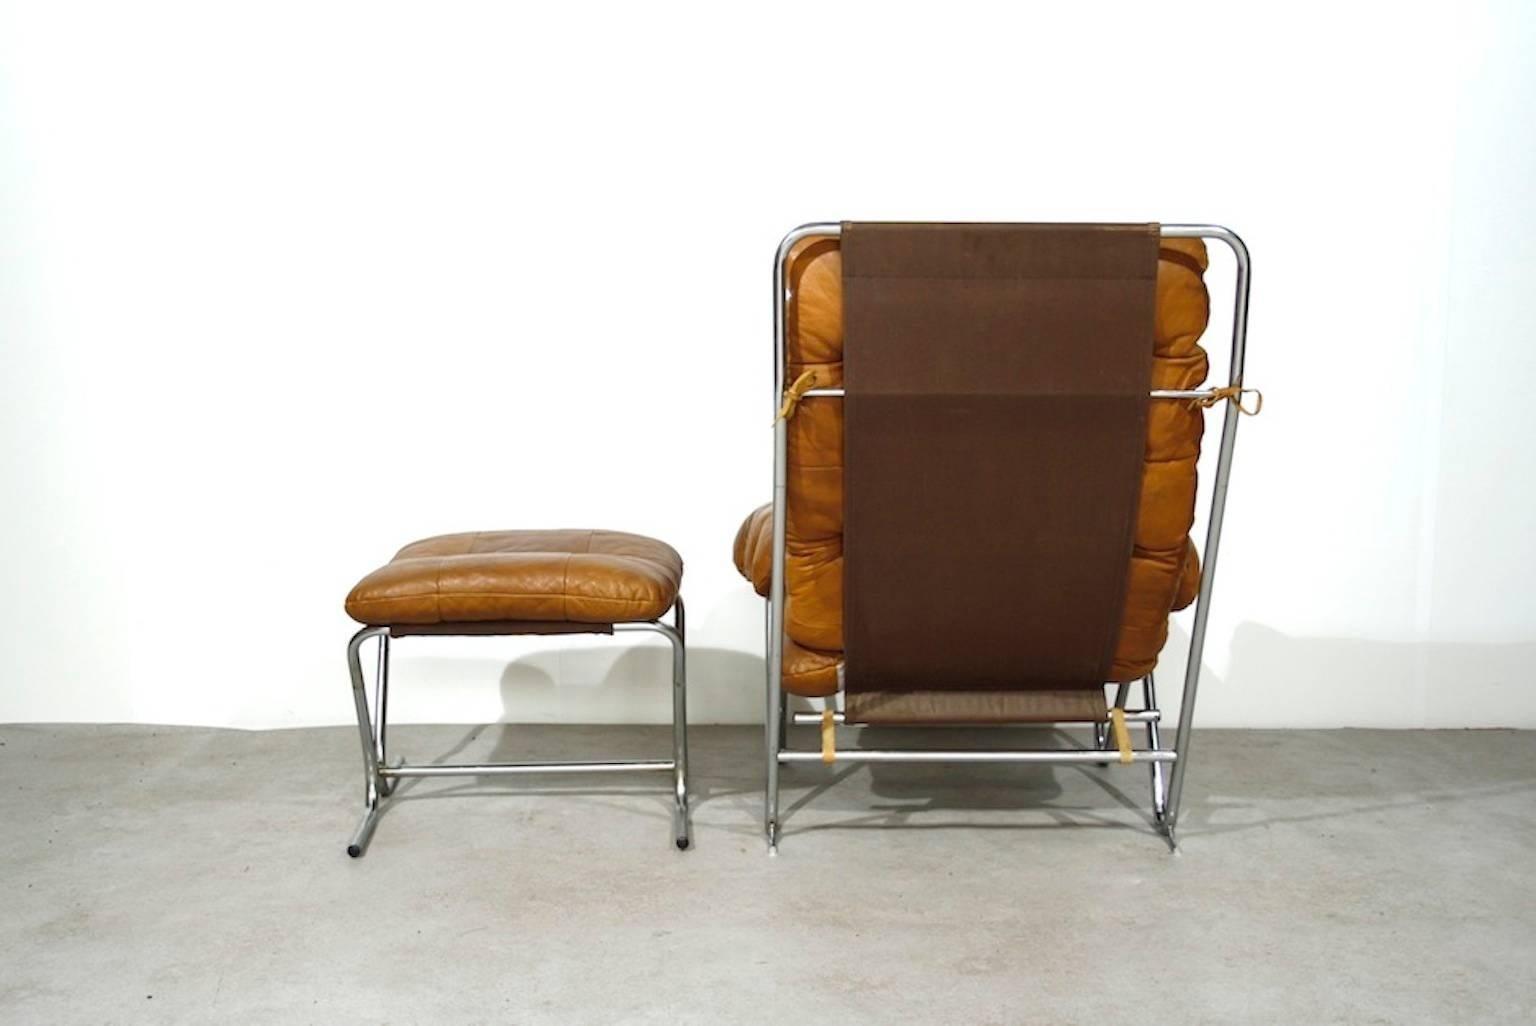 Scandinavian Modern Midcentury Cognac Leather and Tubular Chrome Lounge Chair with Ottoman For Sale